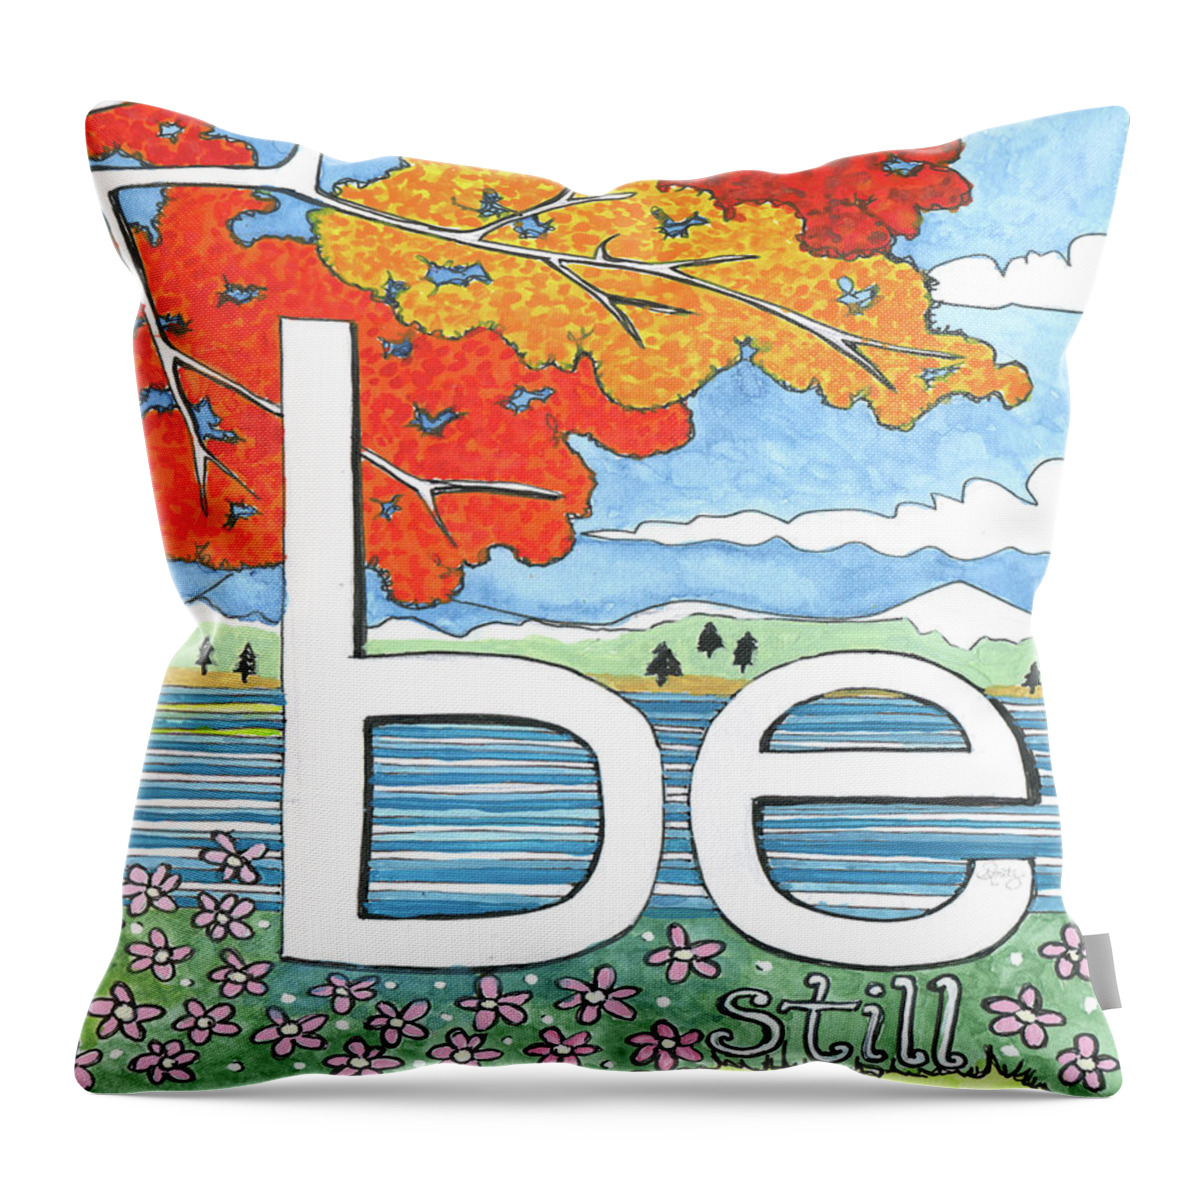 Meditative Throw Pillow featuring the painting Be Still by Michele Fritz